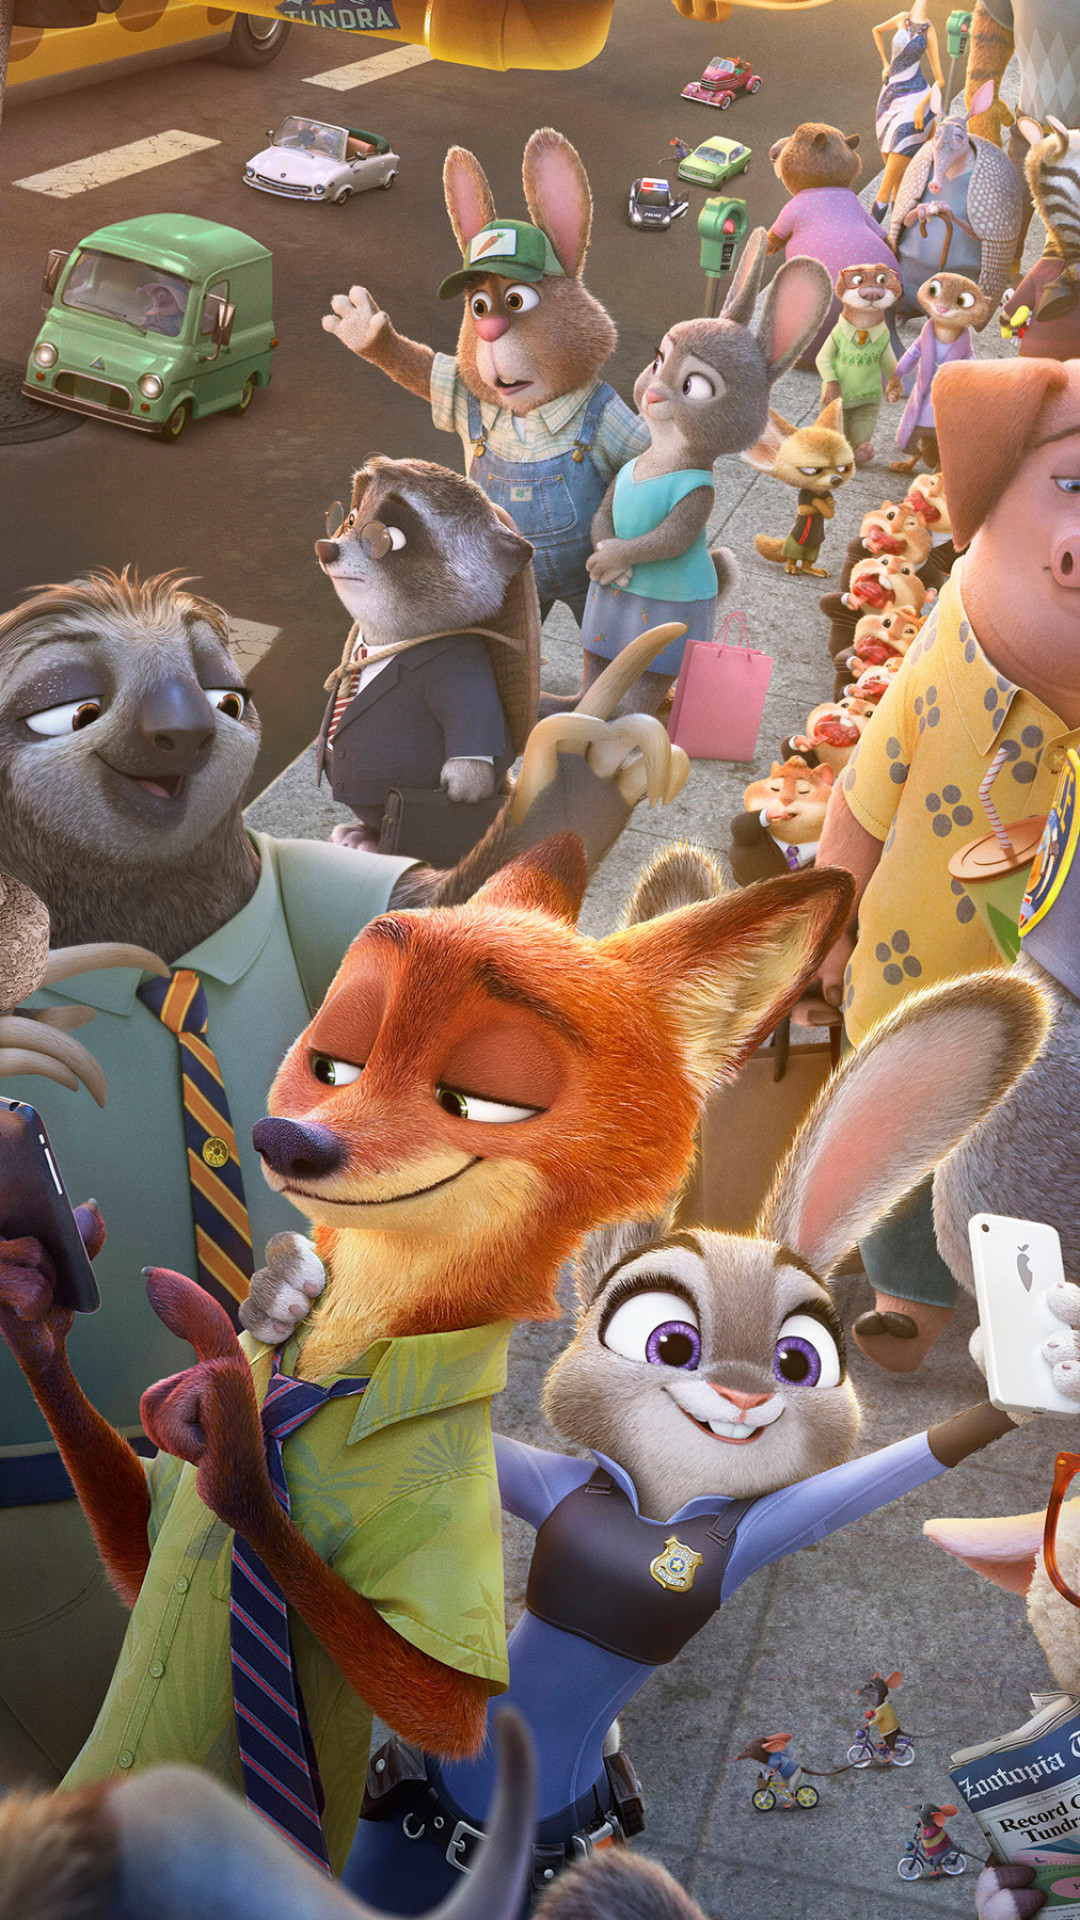 Zootopia Hd Iphone Wallpapers, Download Free Hd Wallpapers - Zootopia  Wallpaper Iphone - 1080x1920 Wallpaper 